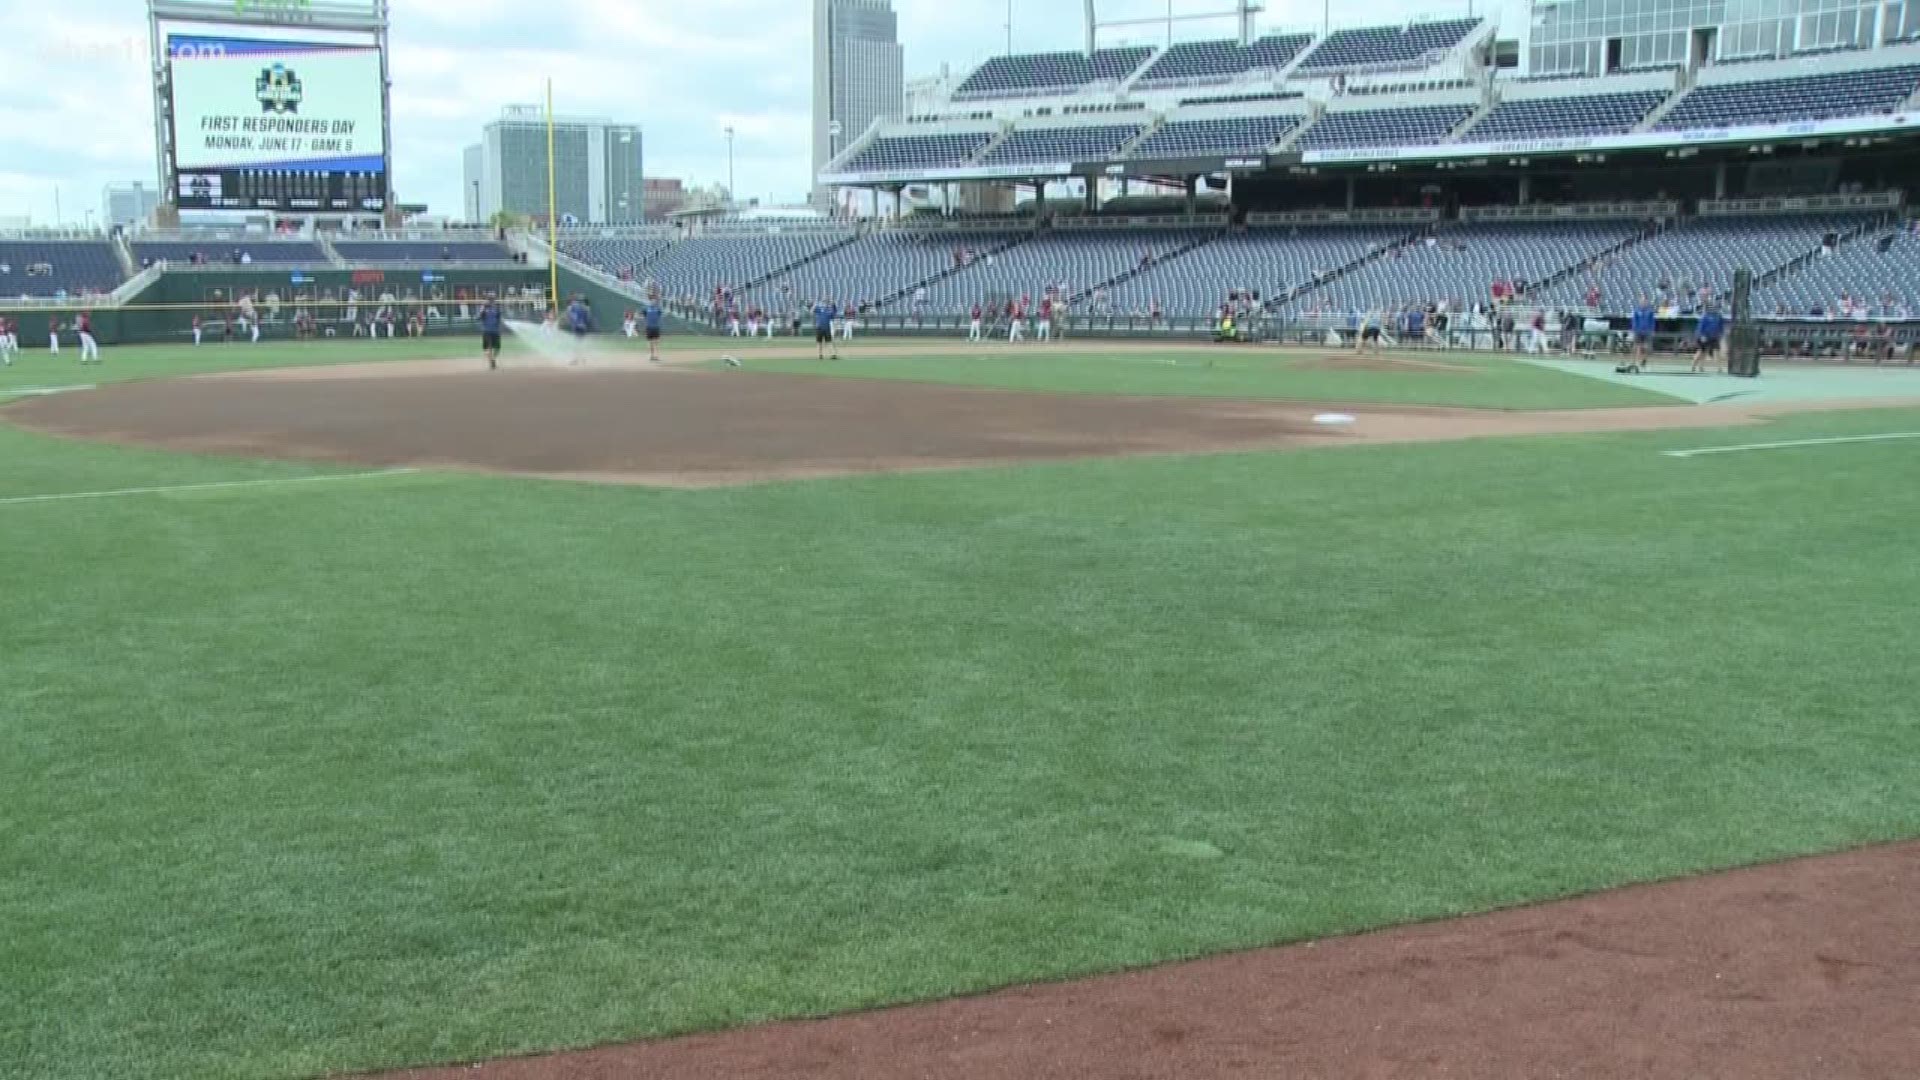 The Louisville Cardinals take the field in Omaha today for their first practice of this year's College World Series.